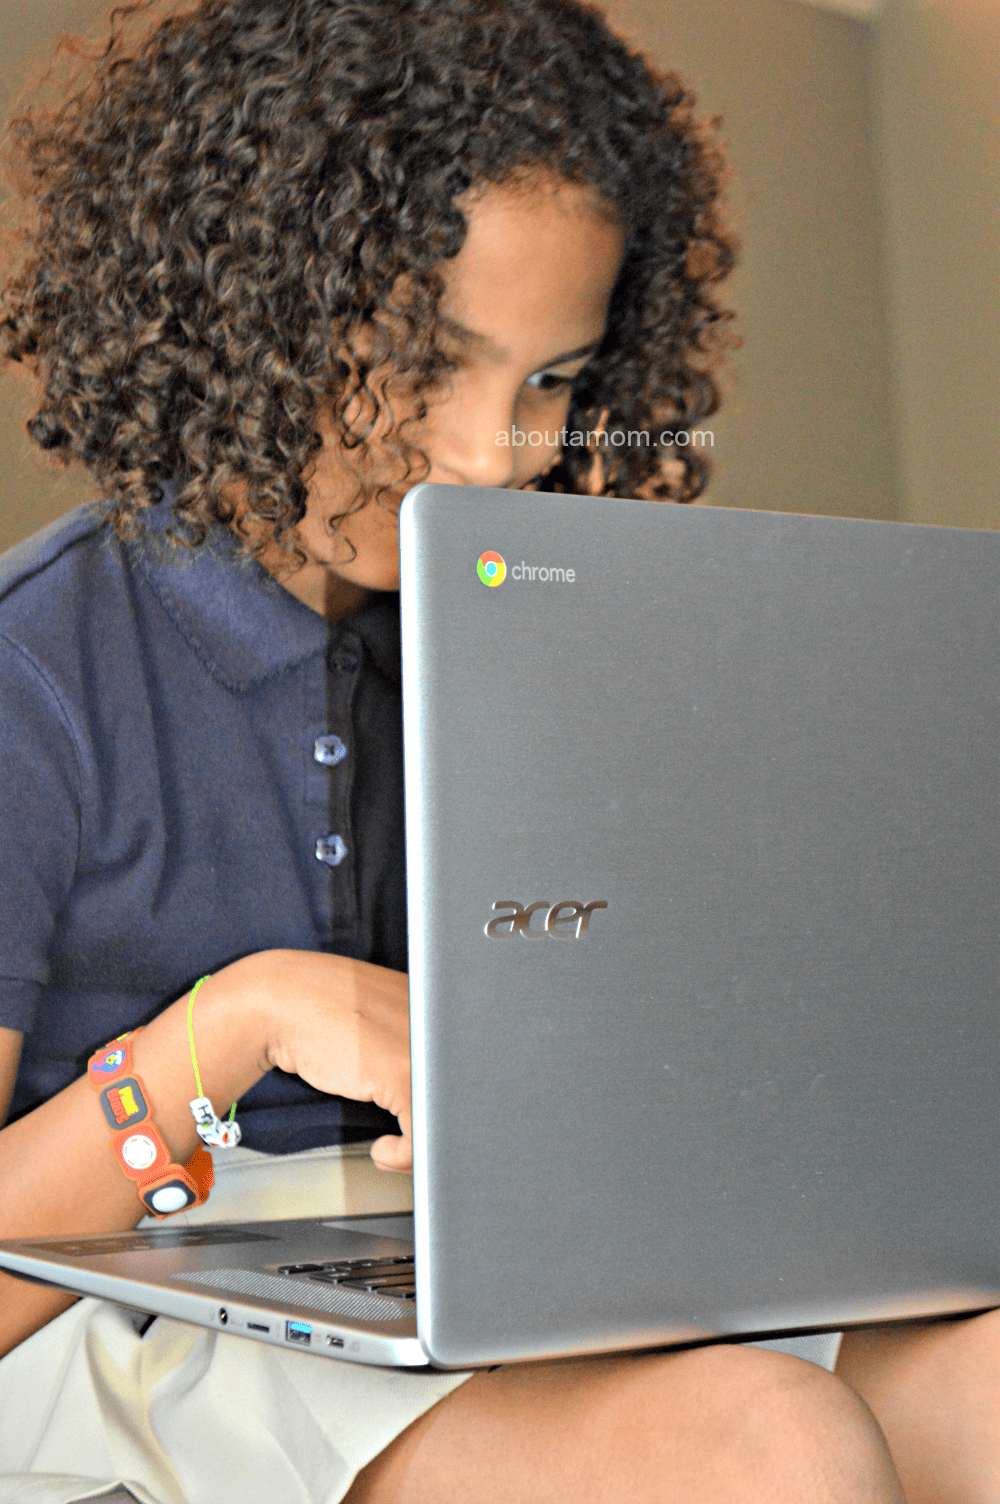 With a larger display, long-lasting battery life, and the ability for multiple users, the Acer Chromebook 15 is ideal for family sharing. This affordable Chromebook has a lot going for it.